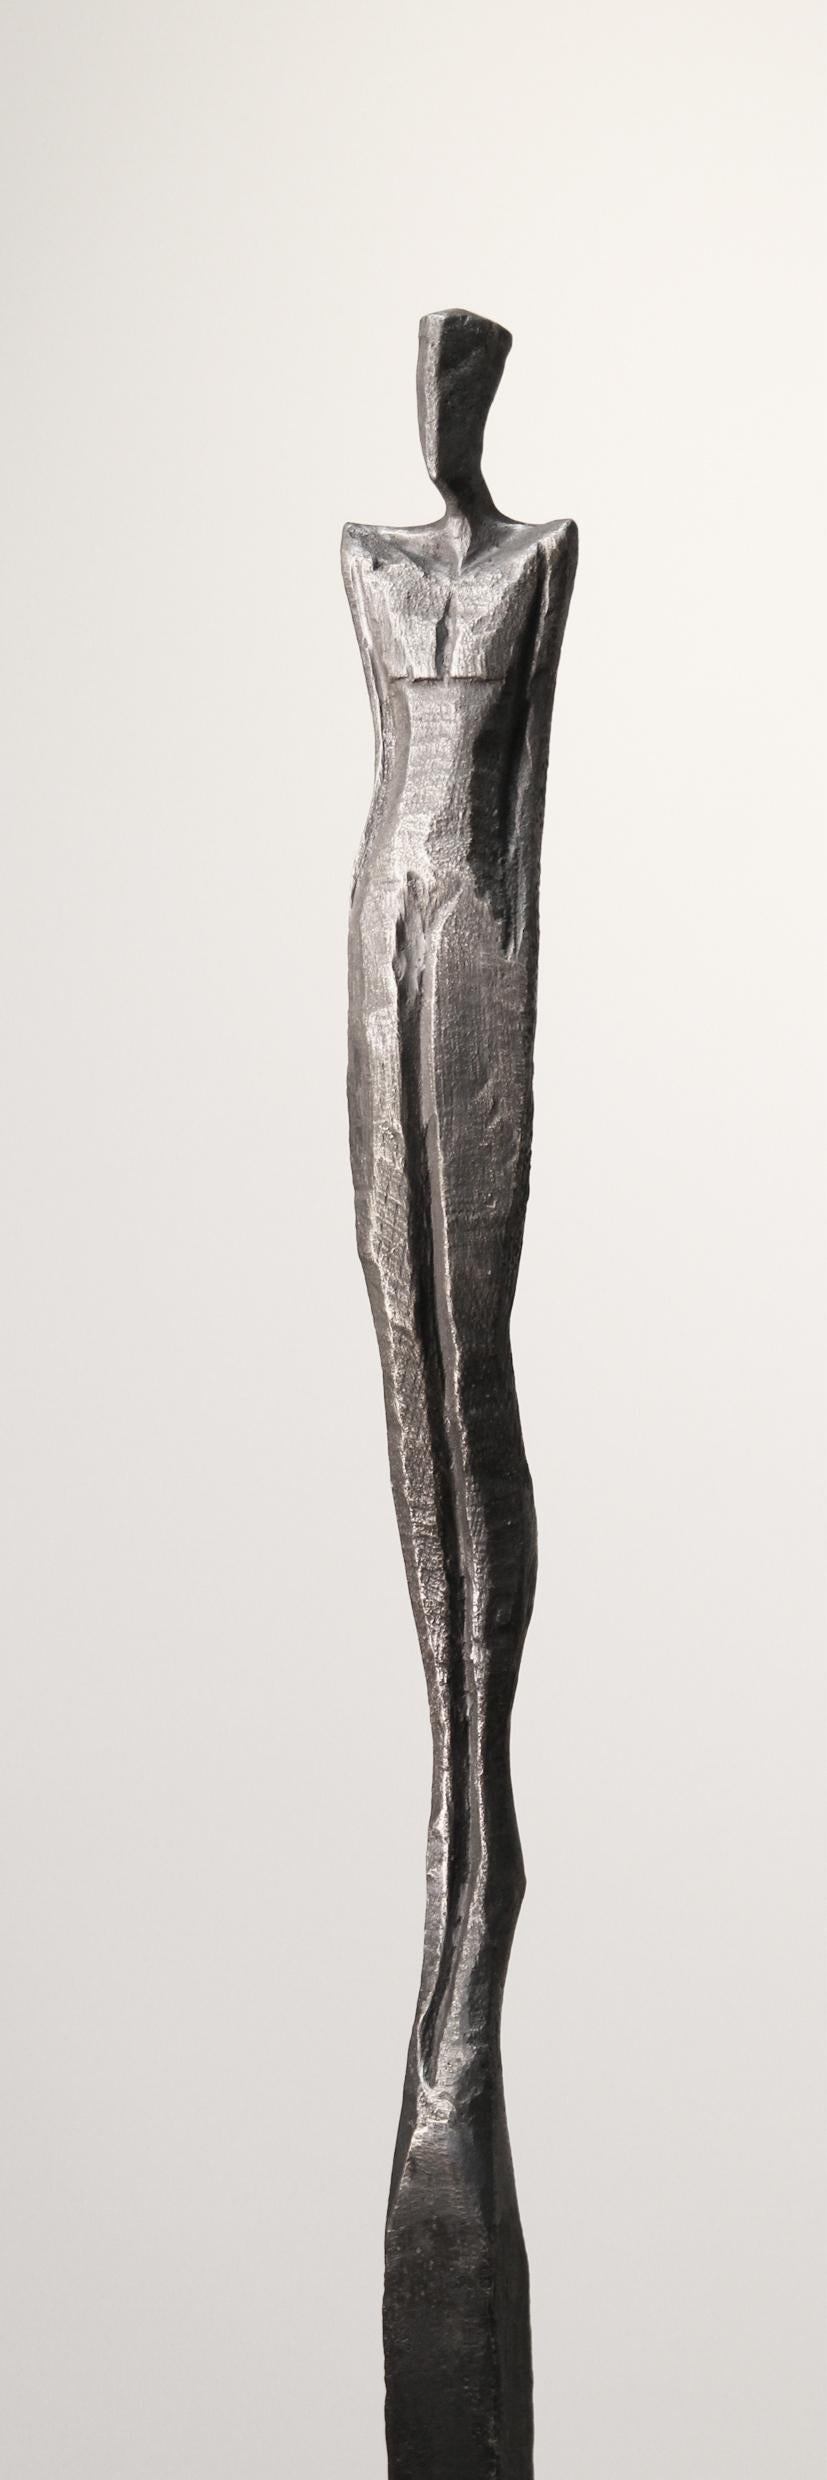 Edward III is a tall, elegant bronze sculpture of a human figure.  

Nando Kallweit is a German sculptor working in bronze and oak.  Kallweit carves the original piece from a piece of oak using a chainsaw.  The oak marque is then used to create a